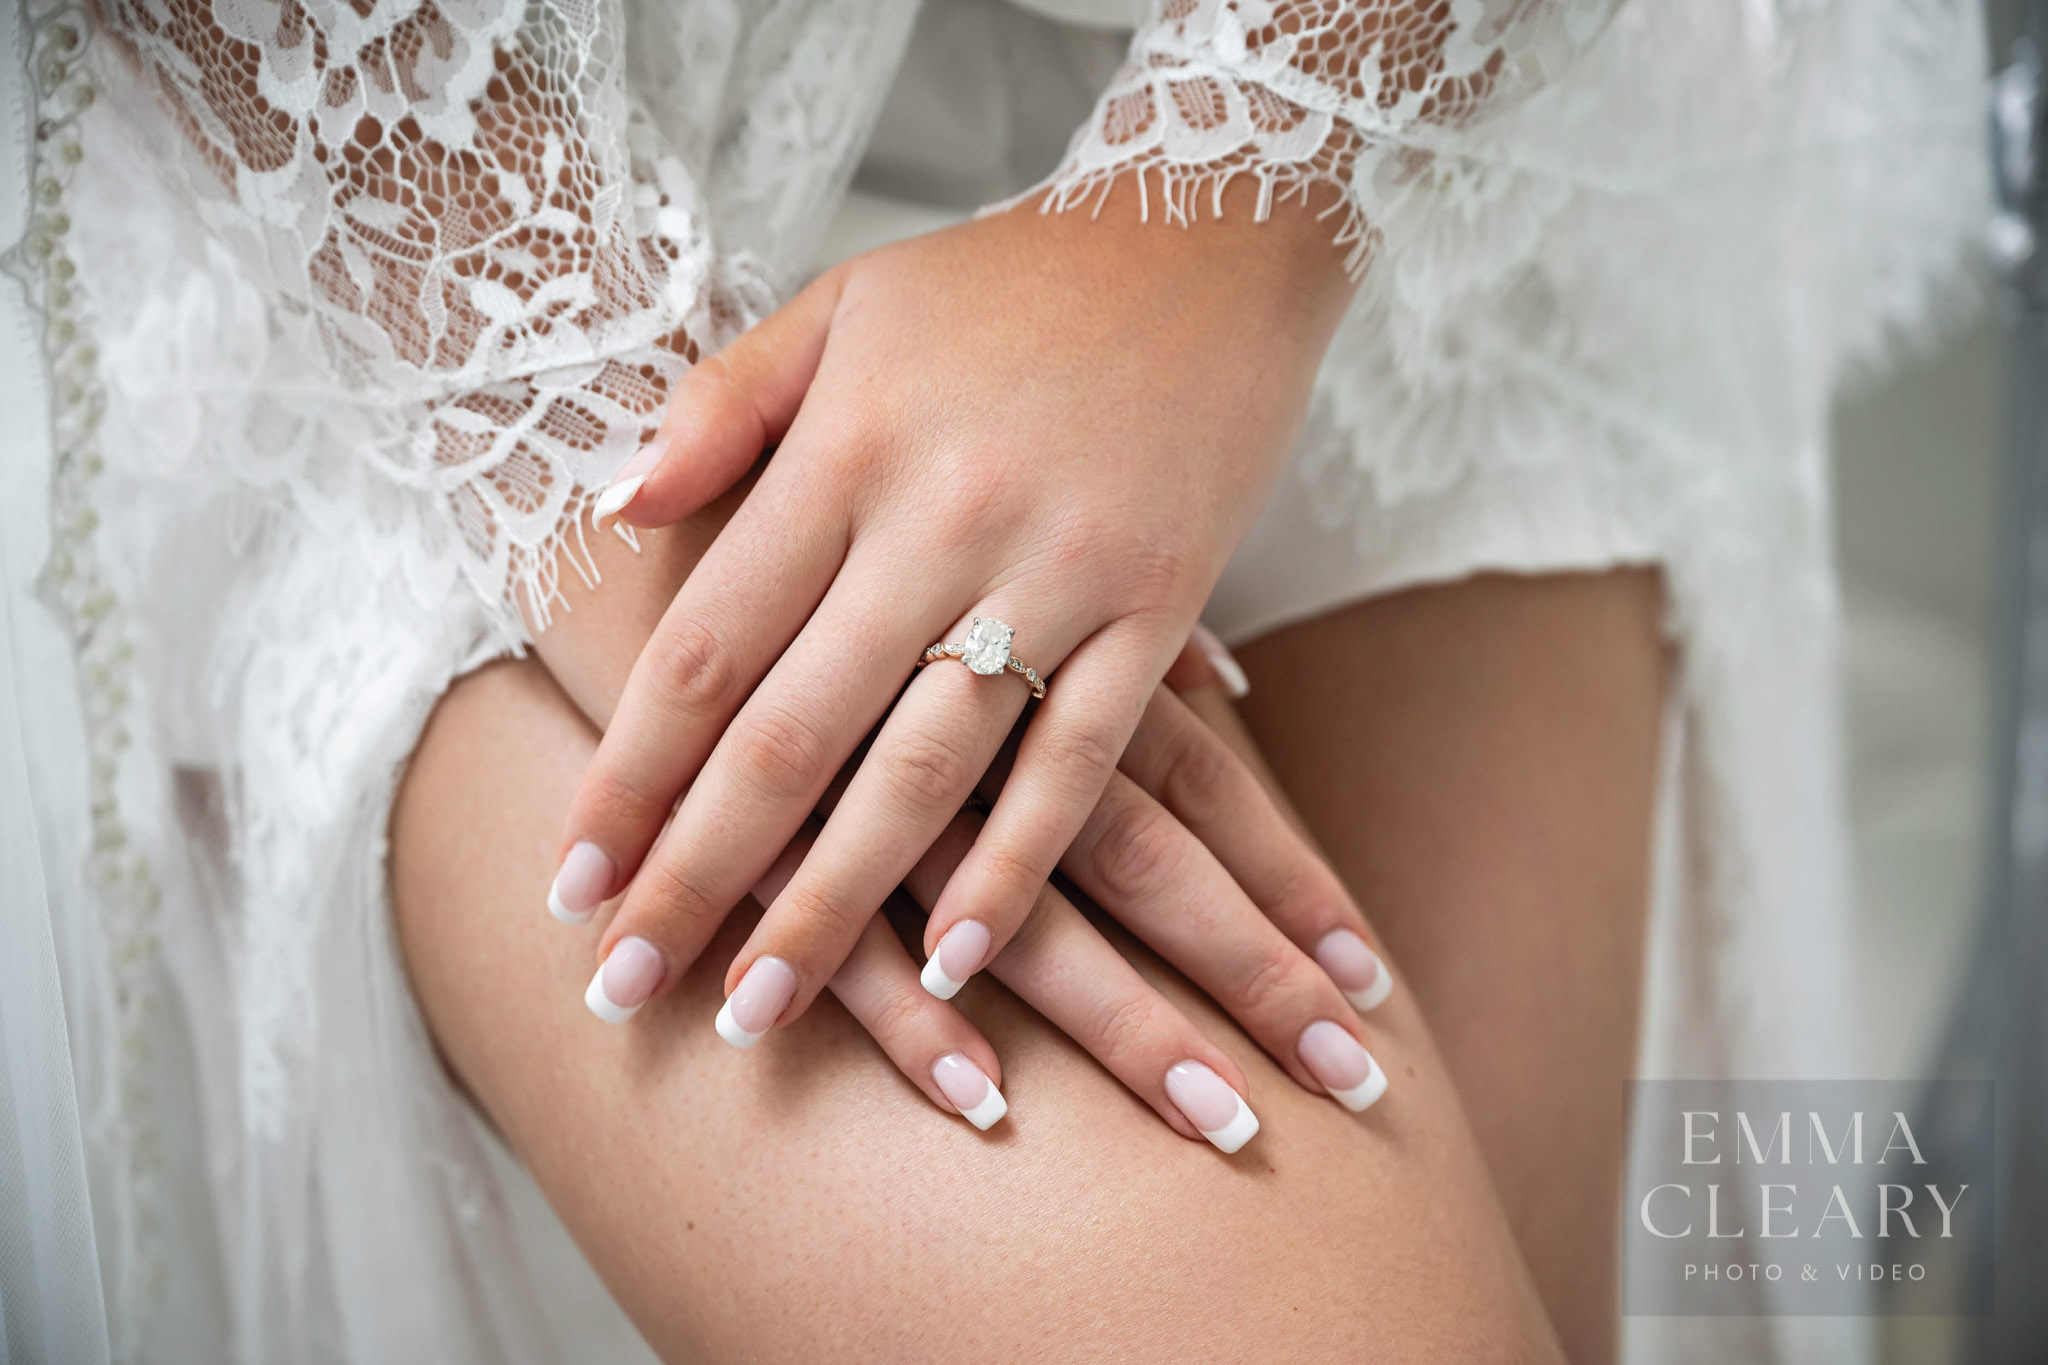 Bride's hands with the ring